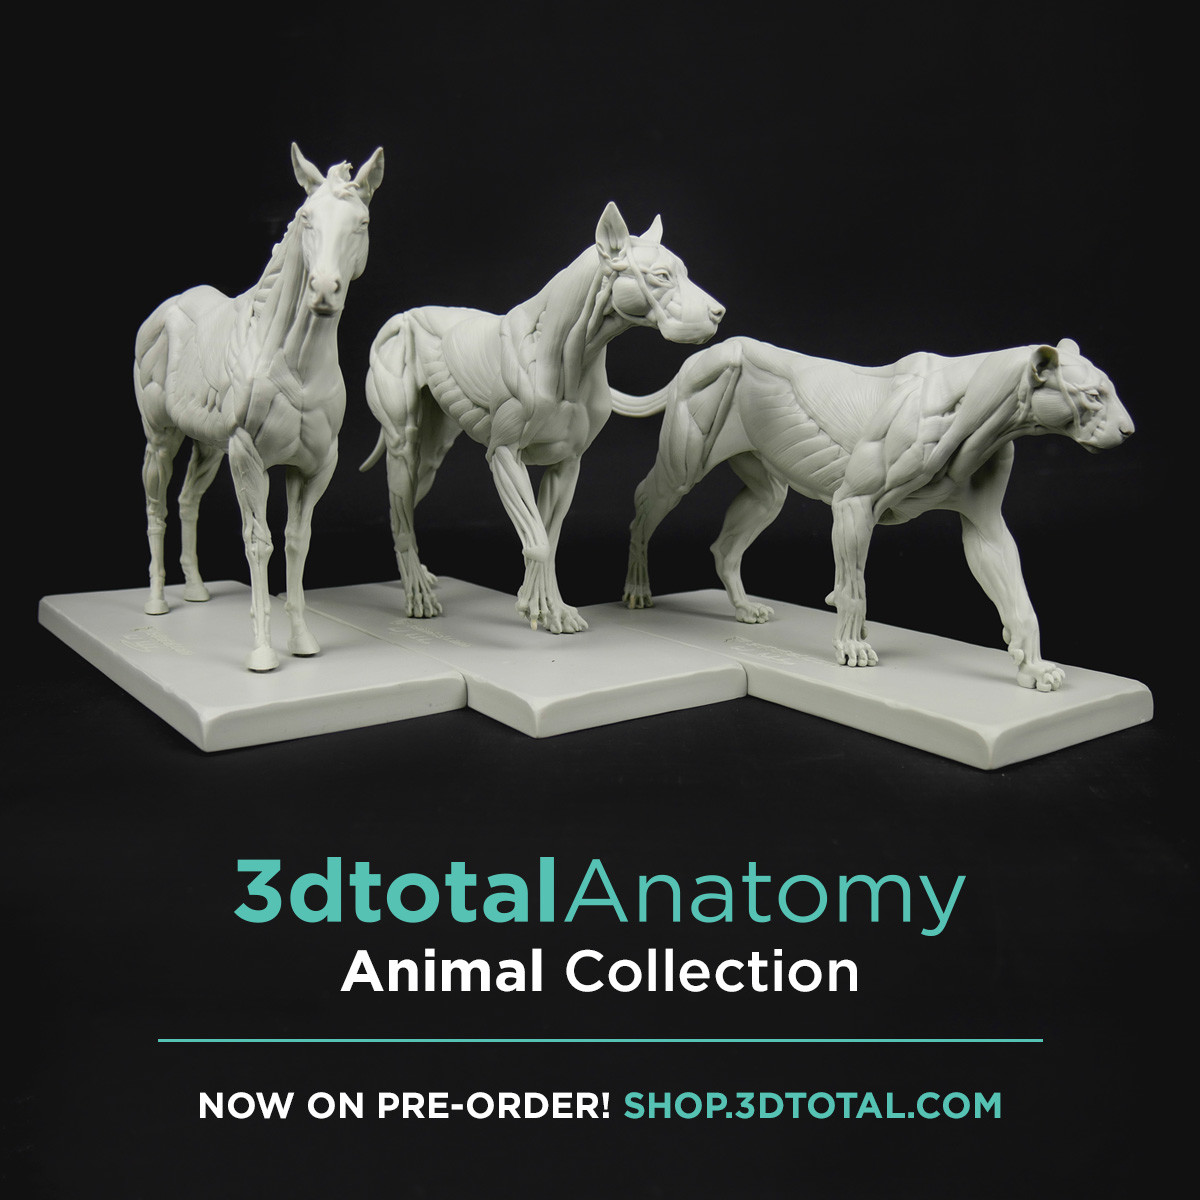 All the family (Equine, Canine and Feline) :
https://shop.3dtotal.com/3dtotal-anatomy-3-piece-set-of-animal-figures.html